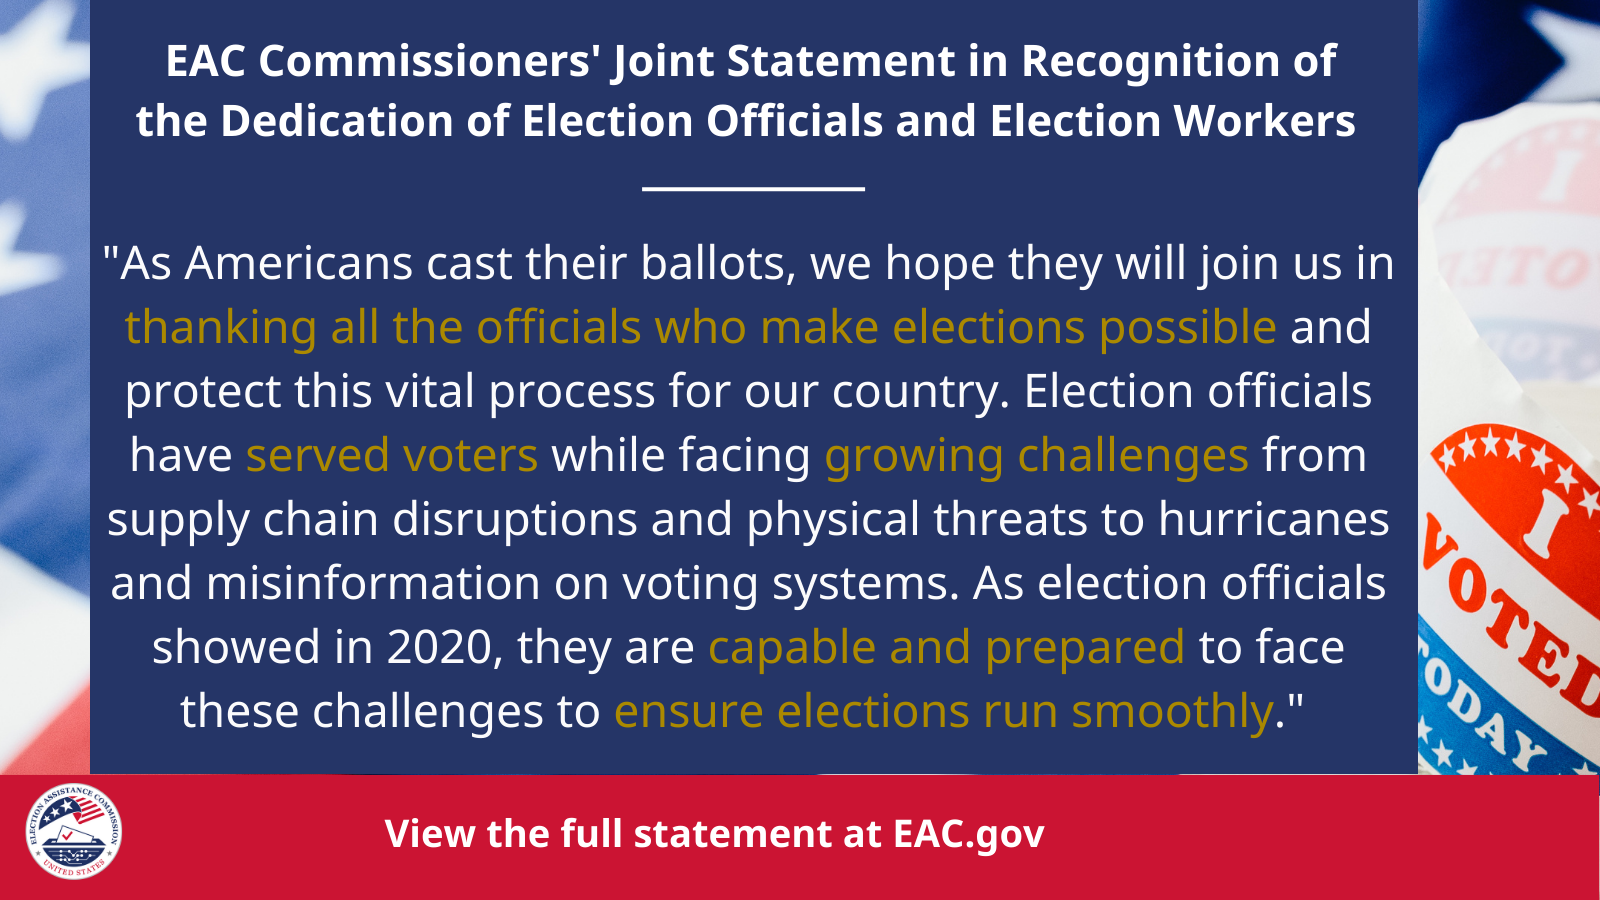 "As Americans cast their ballots, we hope they will join us in thanking all the officials who make elections possible and protect this vital process for our country. Election officials have served voters while facing growing challenges from supply chain disruptions and physical threats to hurricanes and misinformation on voting systems. As election officials showed in 2020, they are capable and prepared to face these challenges to ensure elections run smoothly."